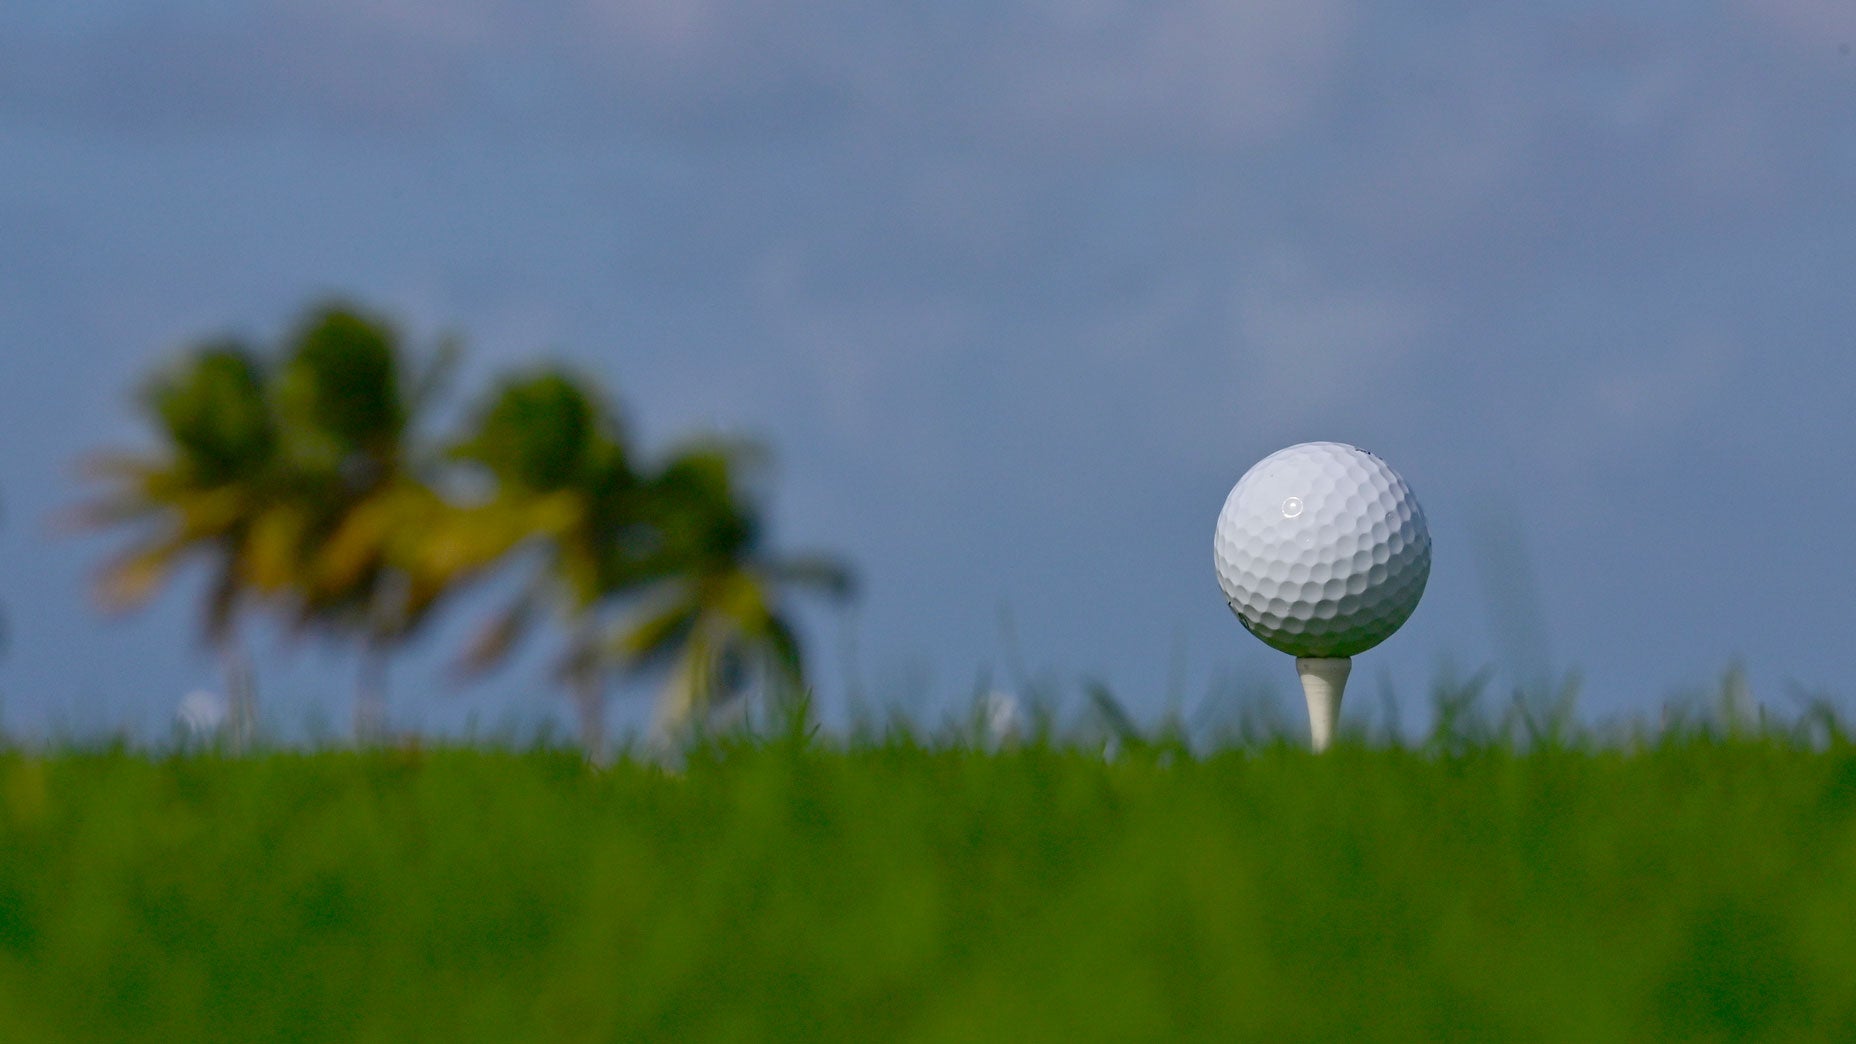 Why a humid day could help you off the tee, according to a meteorologist